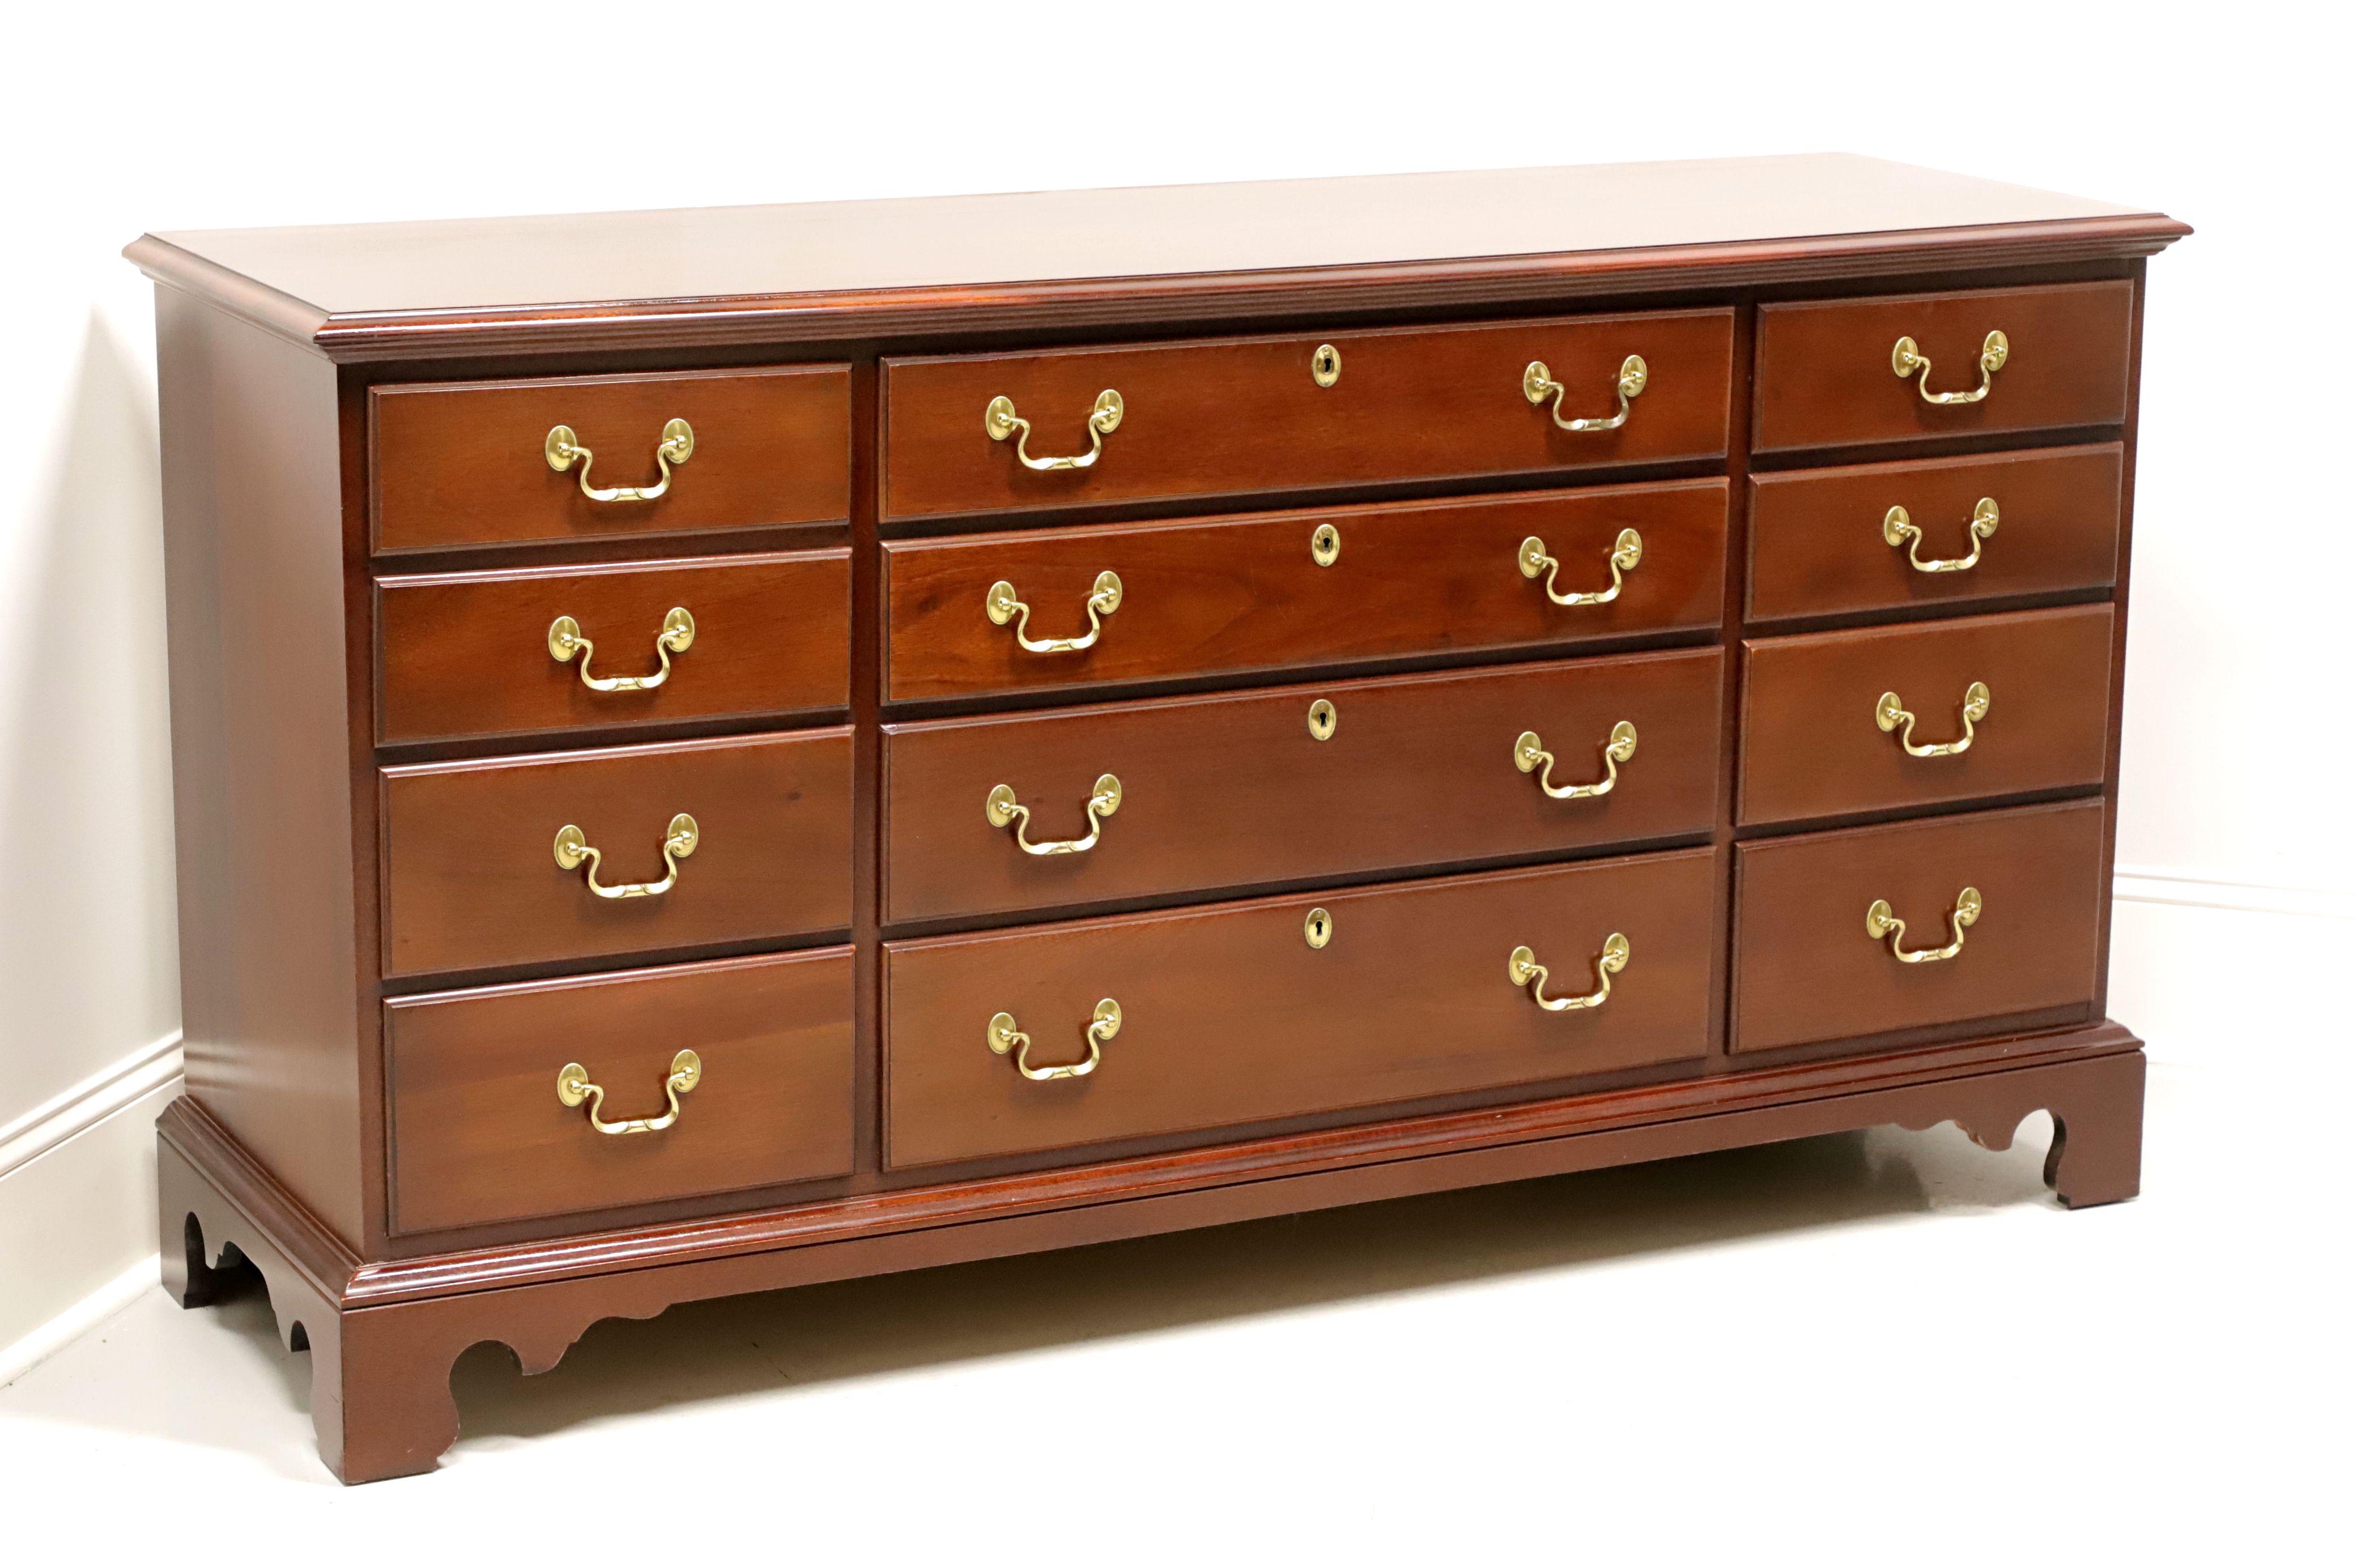 LINK-TAYLOR Heirloom Beaufort Solid Mahogany Chippendale Triple Dresser - A For Sale 4